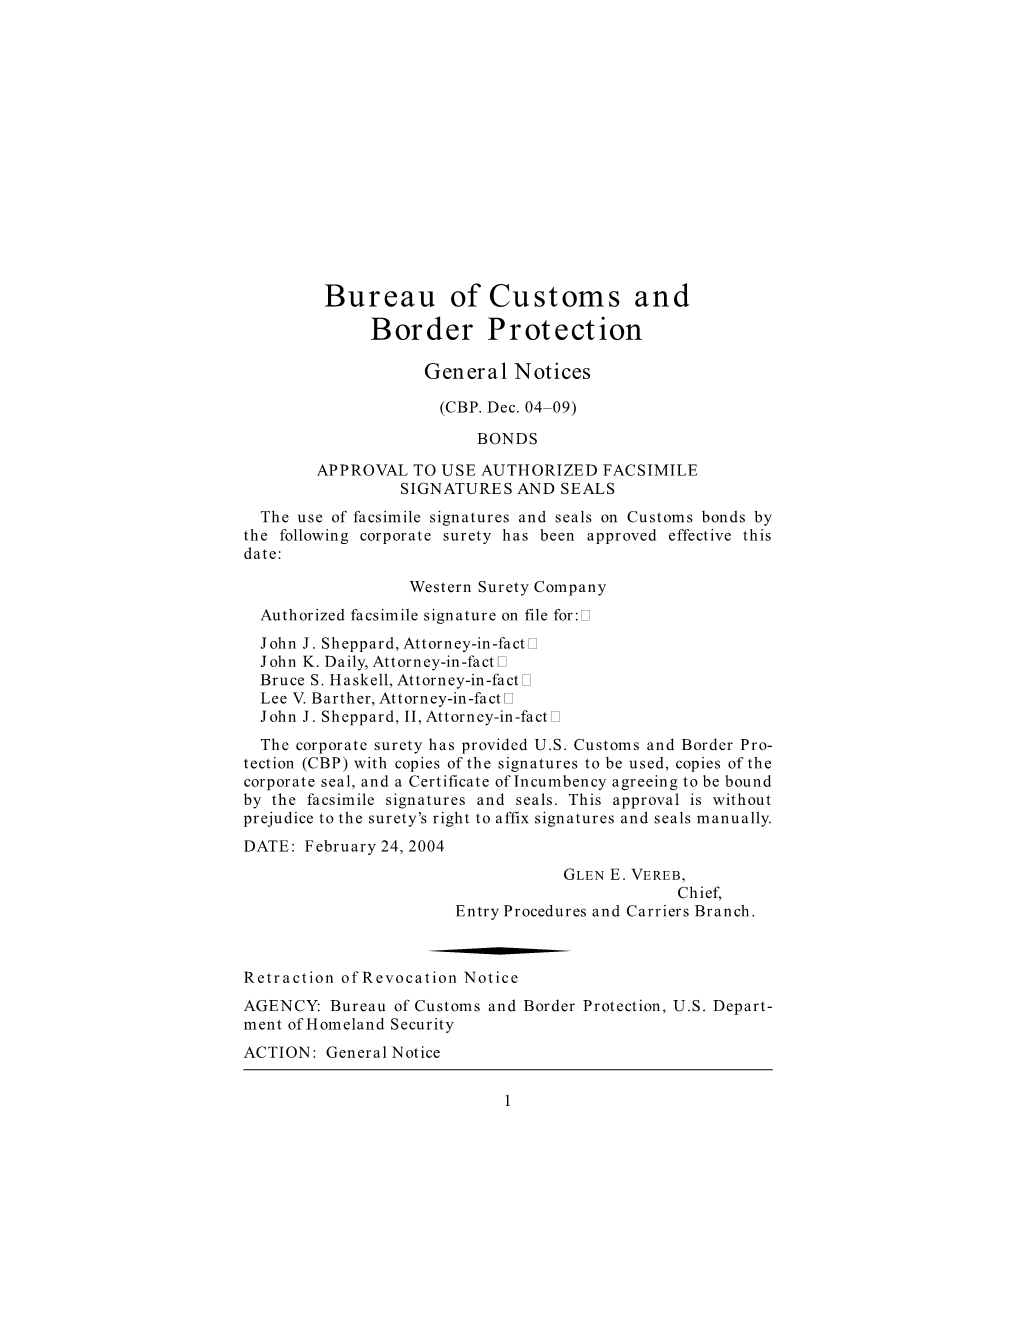 Bureau of Customs and Border Protection General Notices (CBP